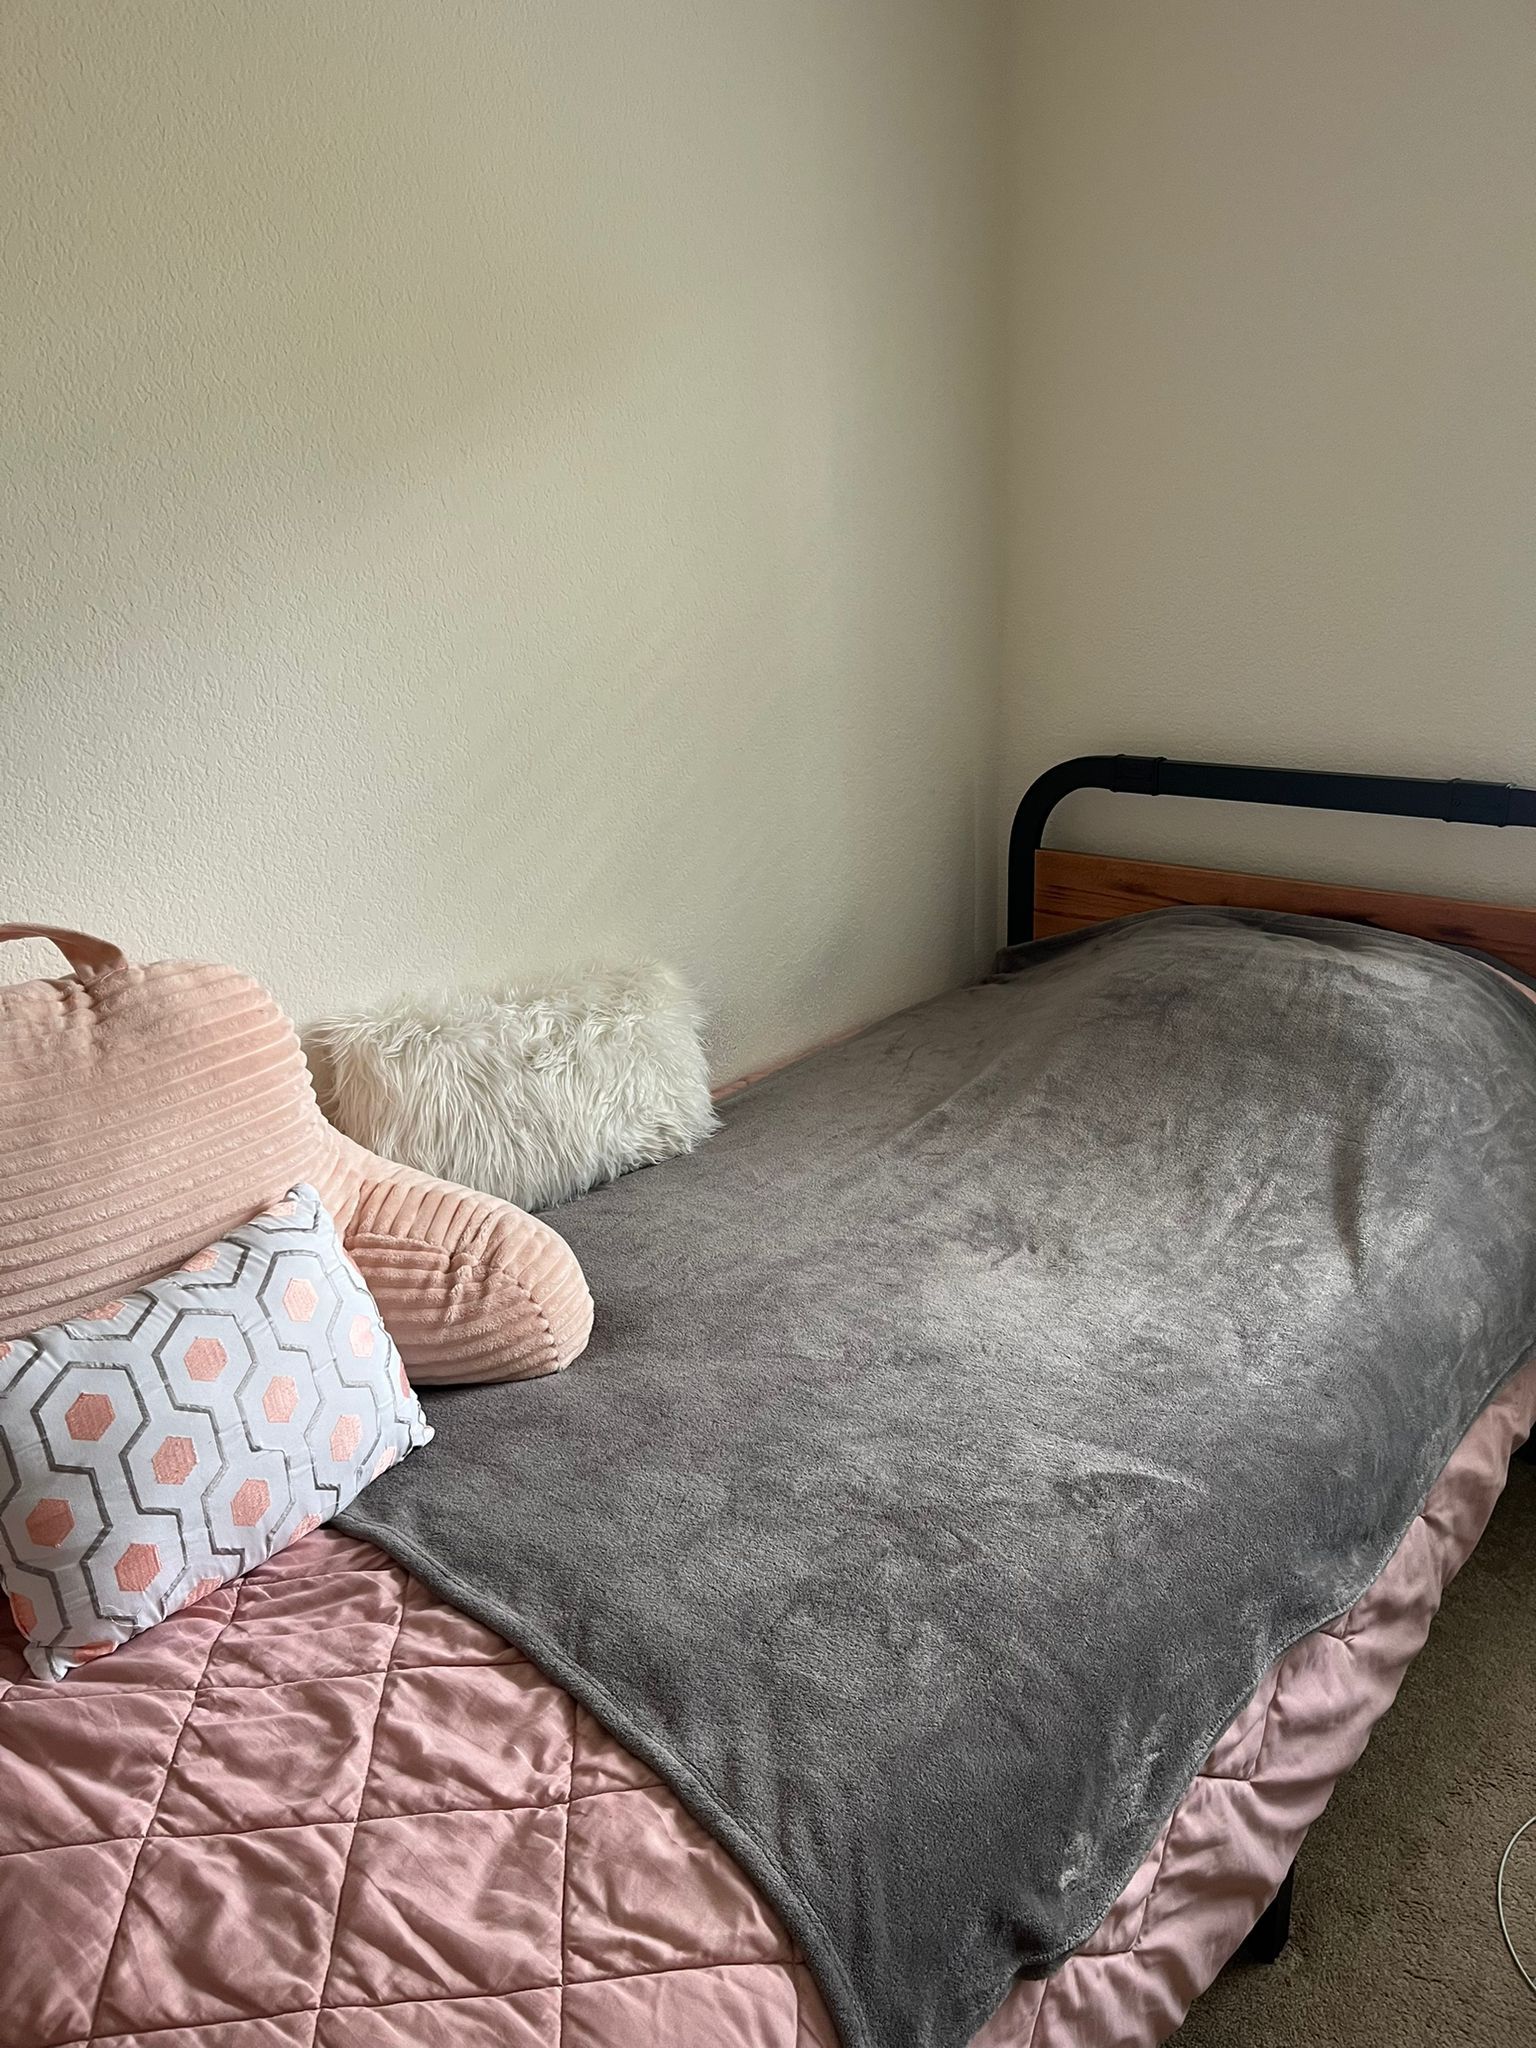 $300 - Twin XL Bed, Twin XL Mattress, Desk and Chair